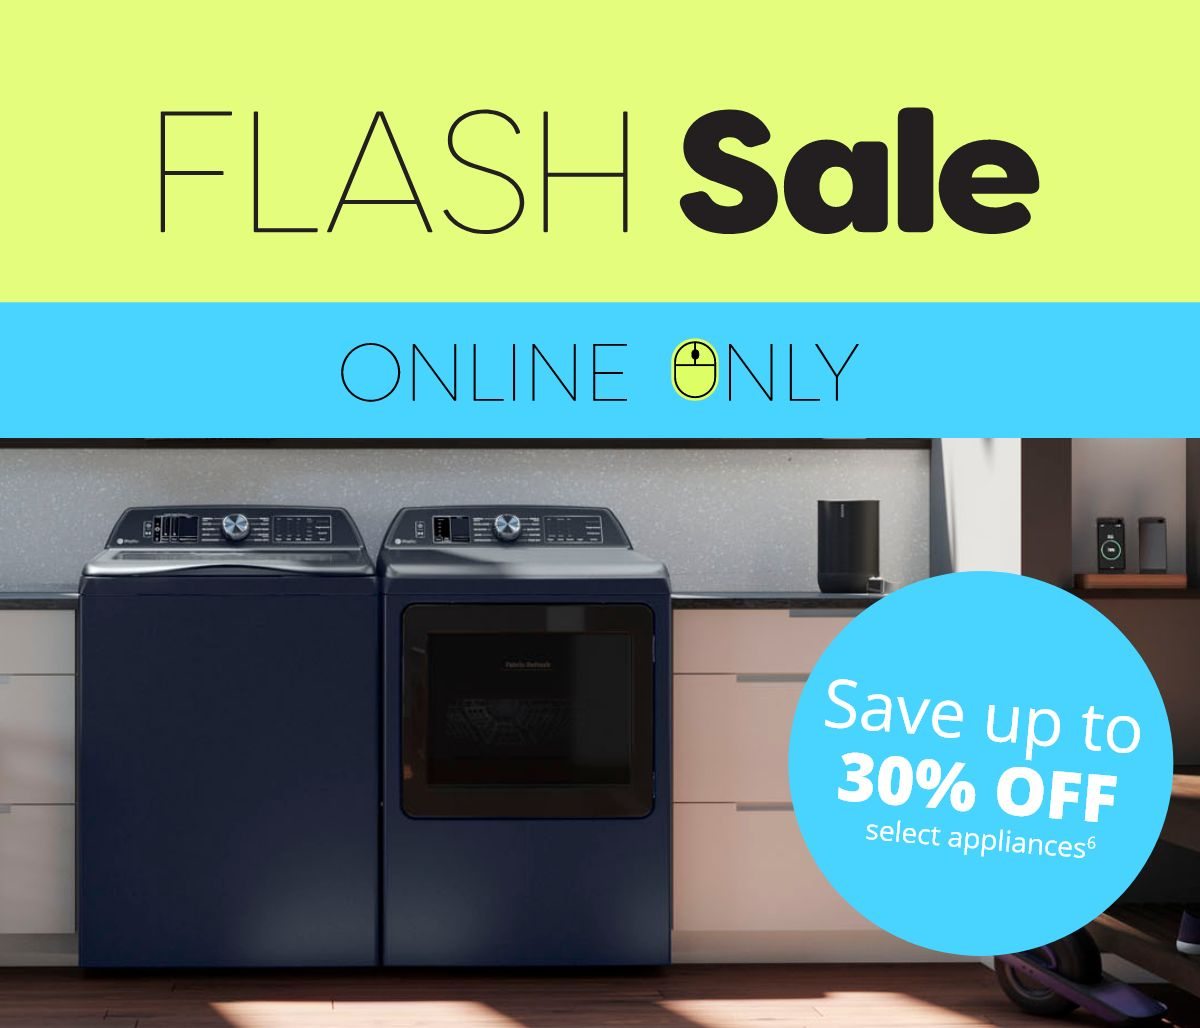 Save up to 30% on select appliances